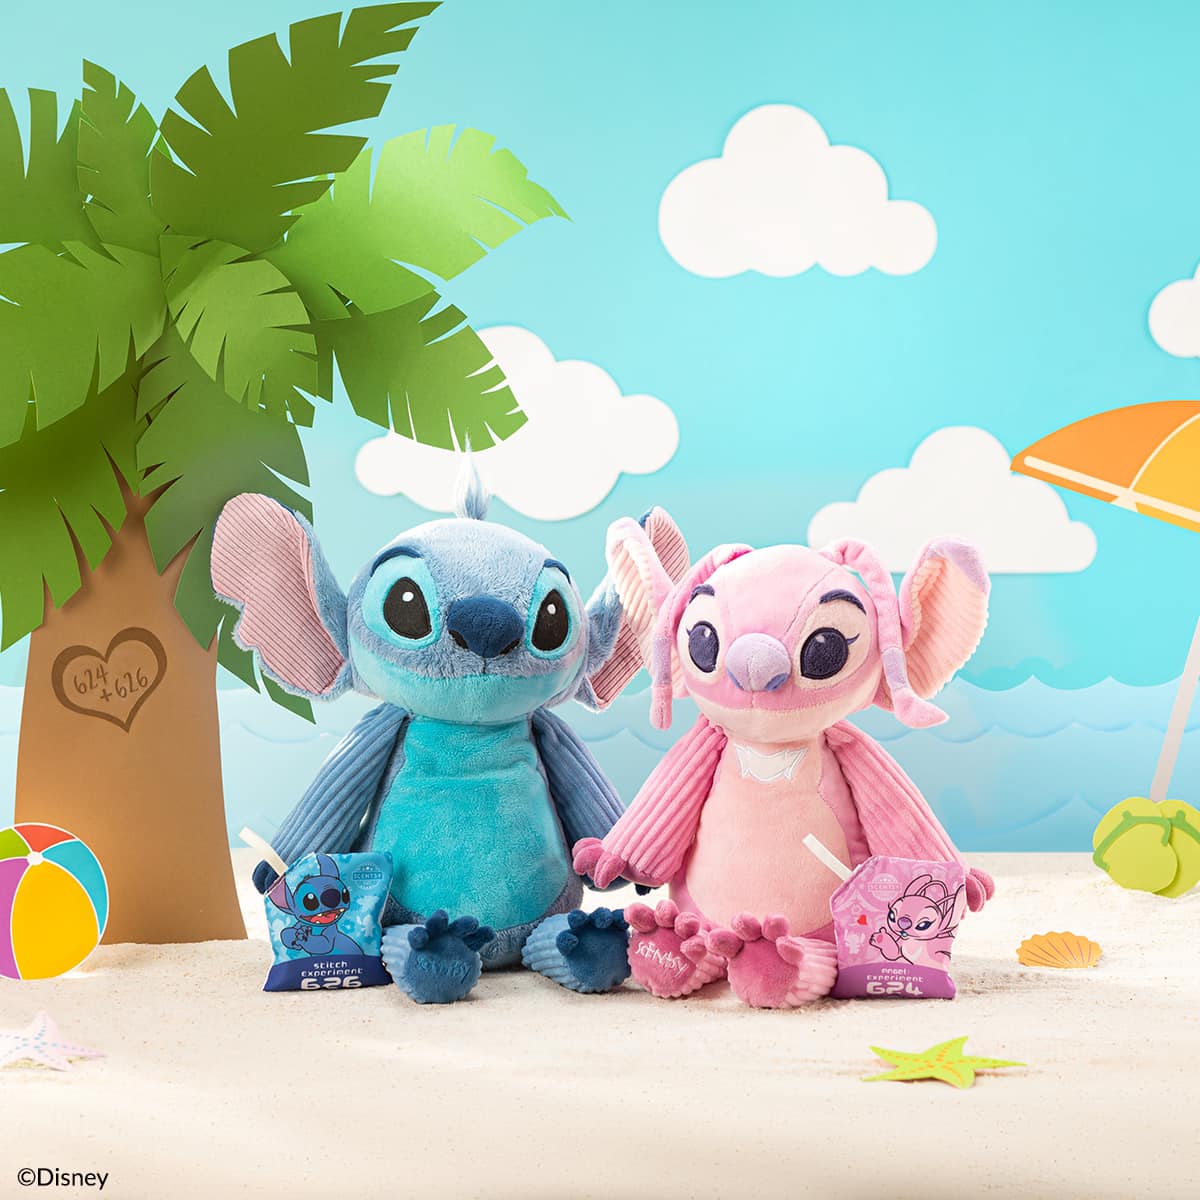 New Stitch Scentsy Warmer And The Return of Stitch and Angel Scentsy Buddies!